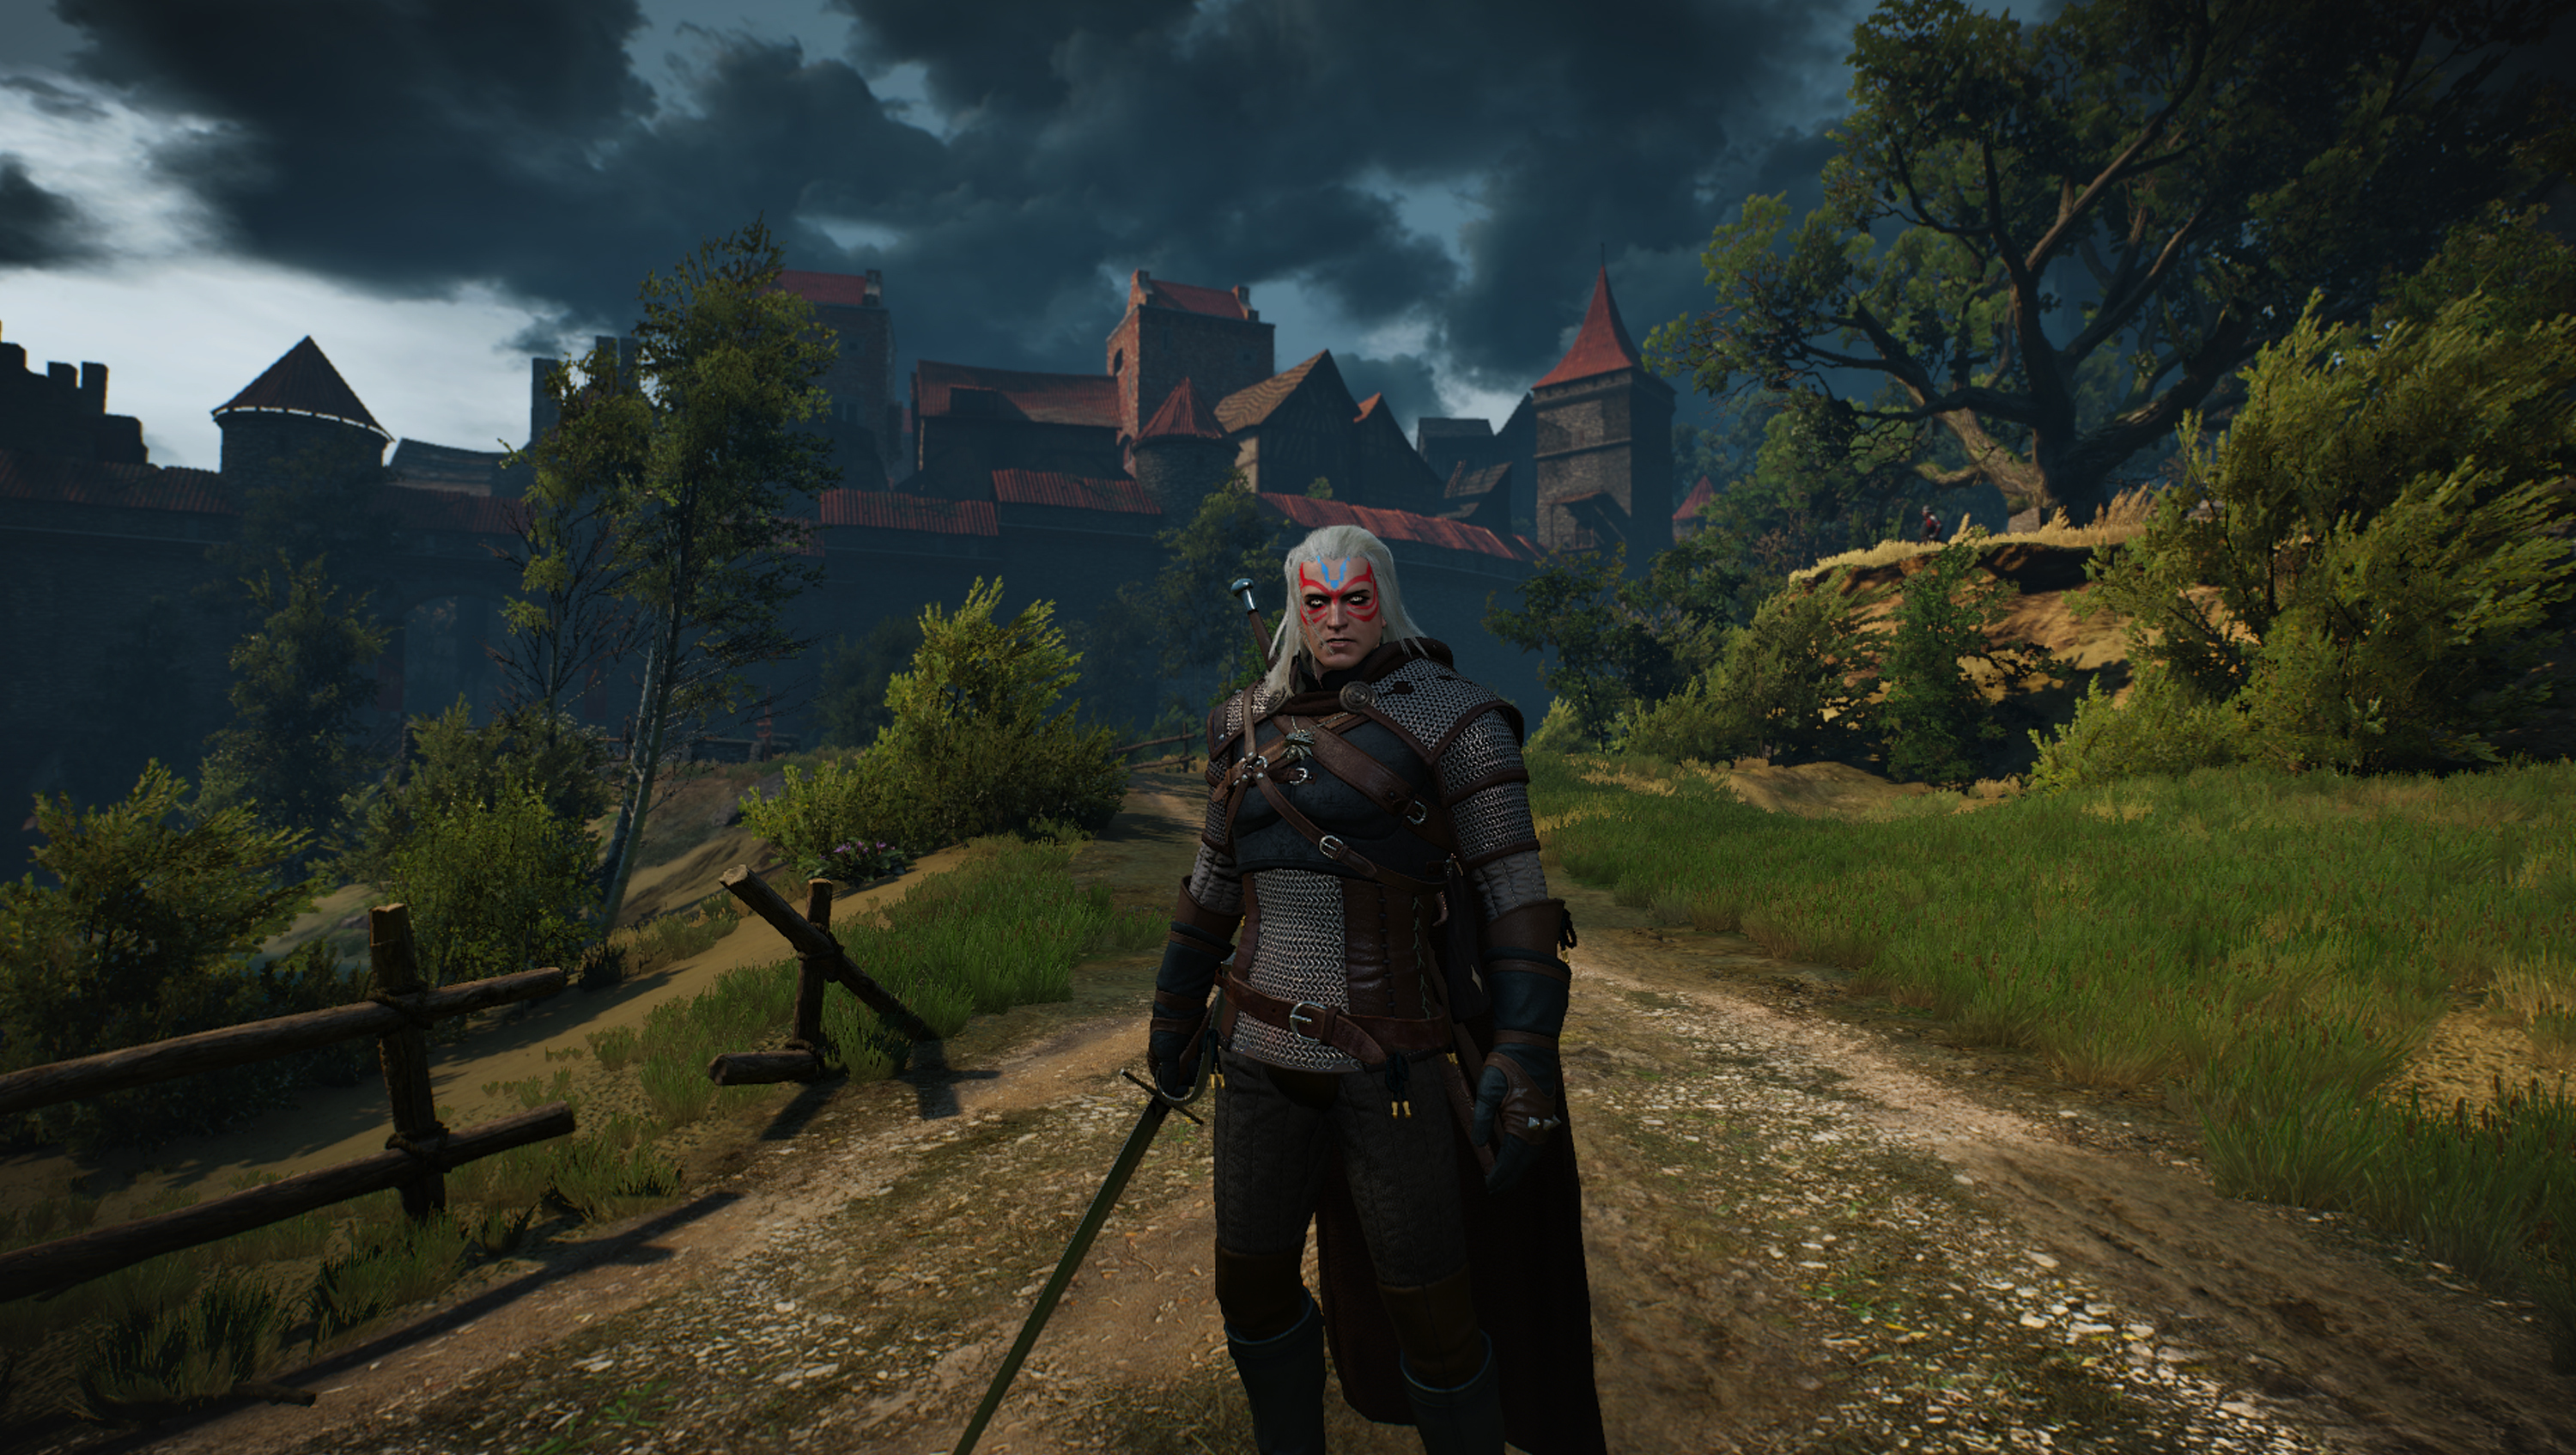 The witcher 3 community patch фото 27